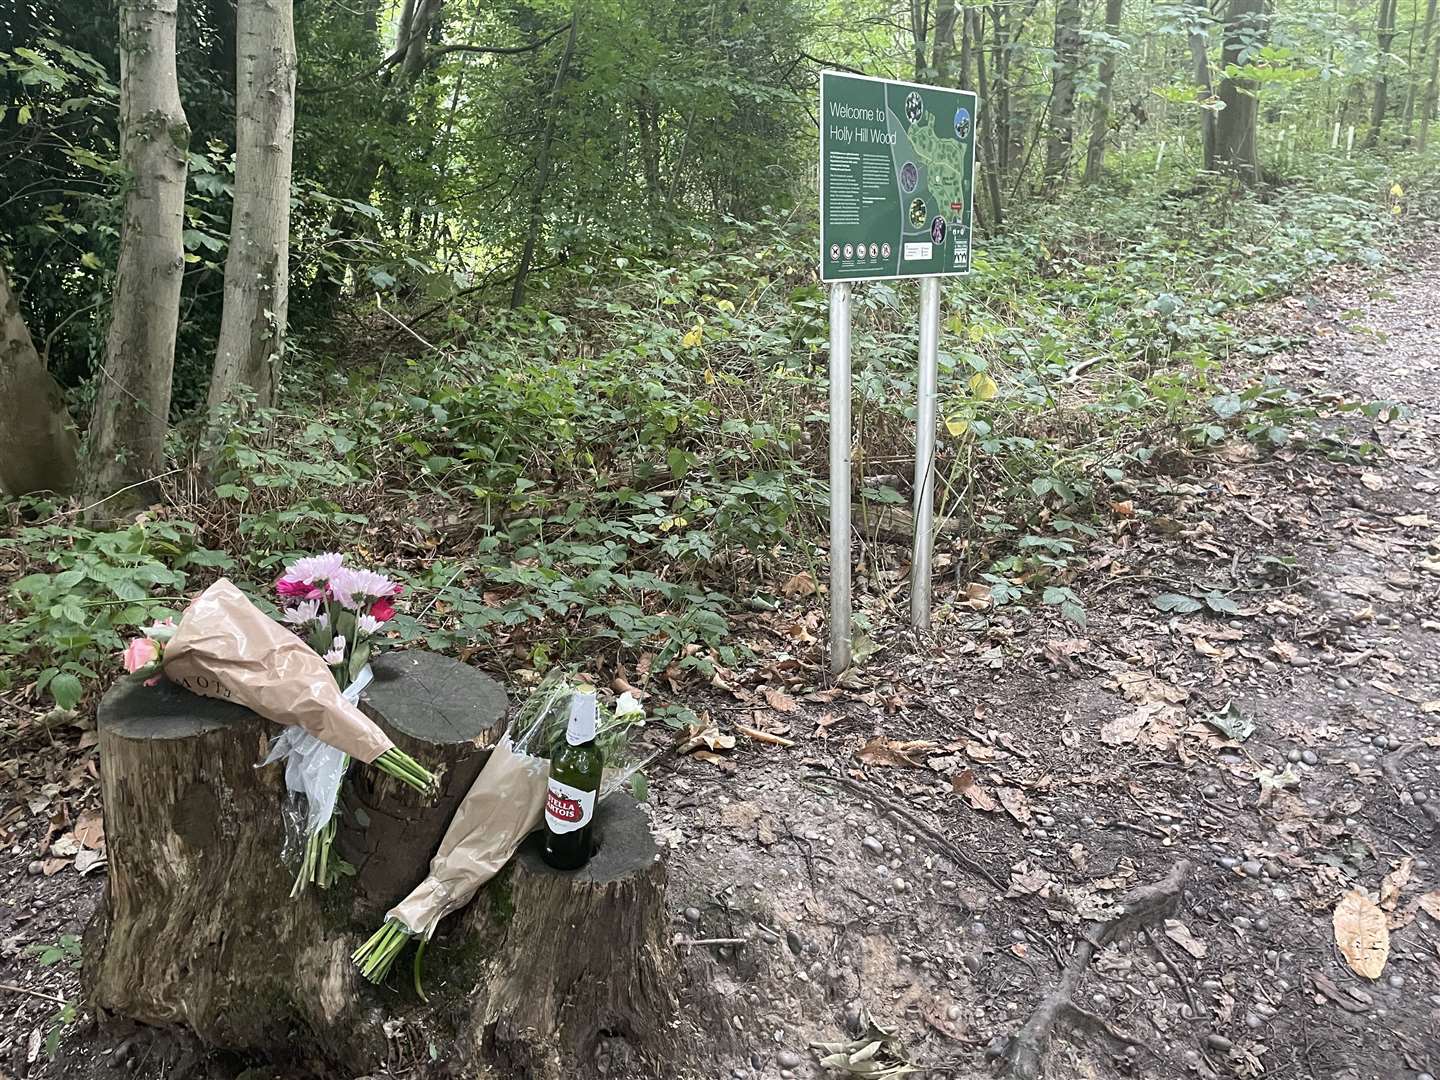 The flowers and beer were placed at Holly Hill Wood, near Snodland